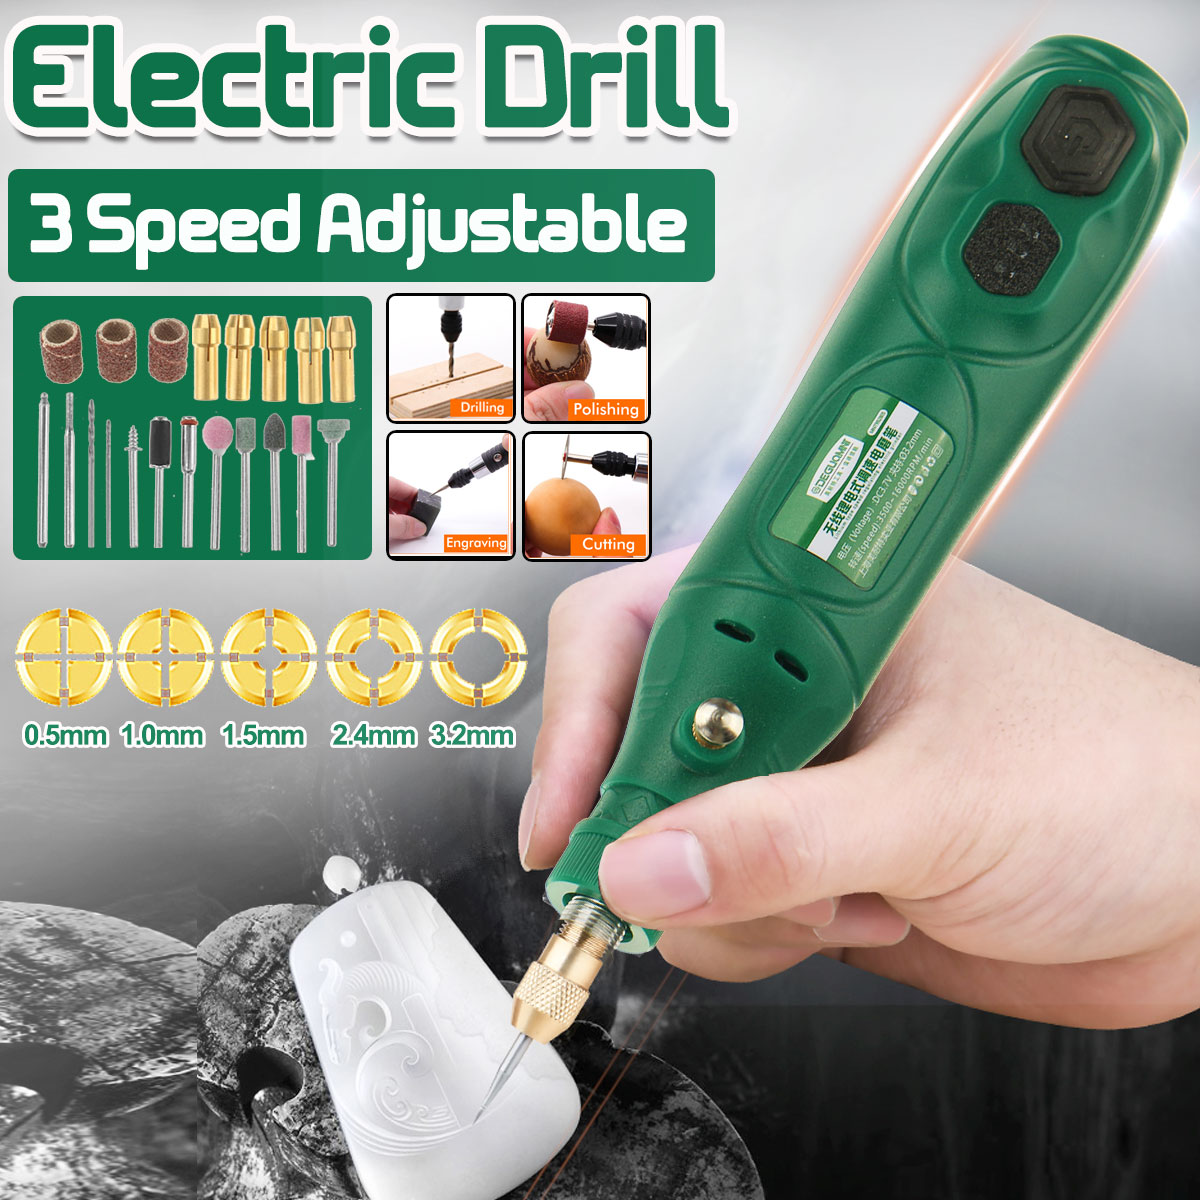 3-Speeds-USB-Rechargeable-Electric-Rotary-Tool-Drill-Grinder-Set-Metal-Wood-Jewelry-Polishing-Engrav-1810530-1